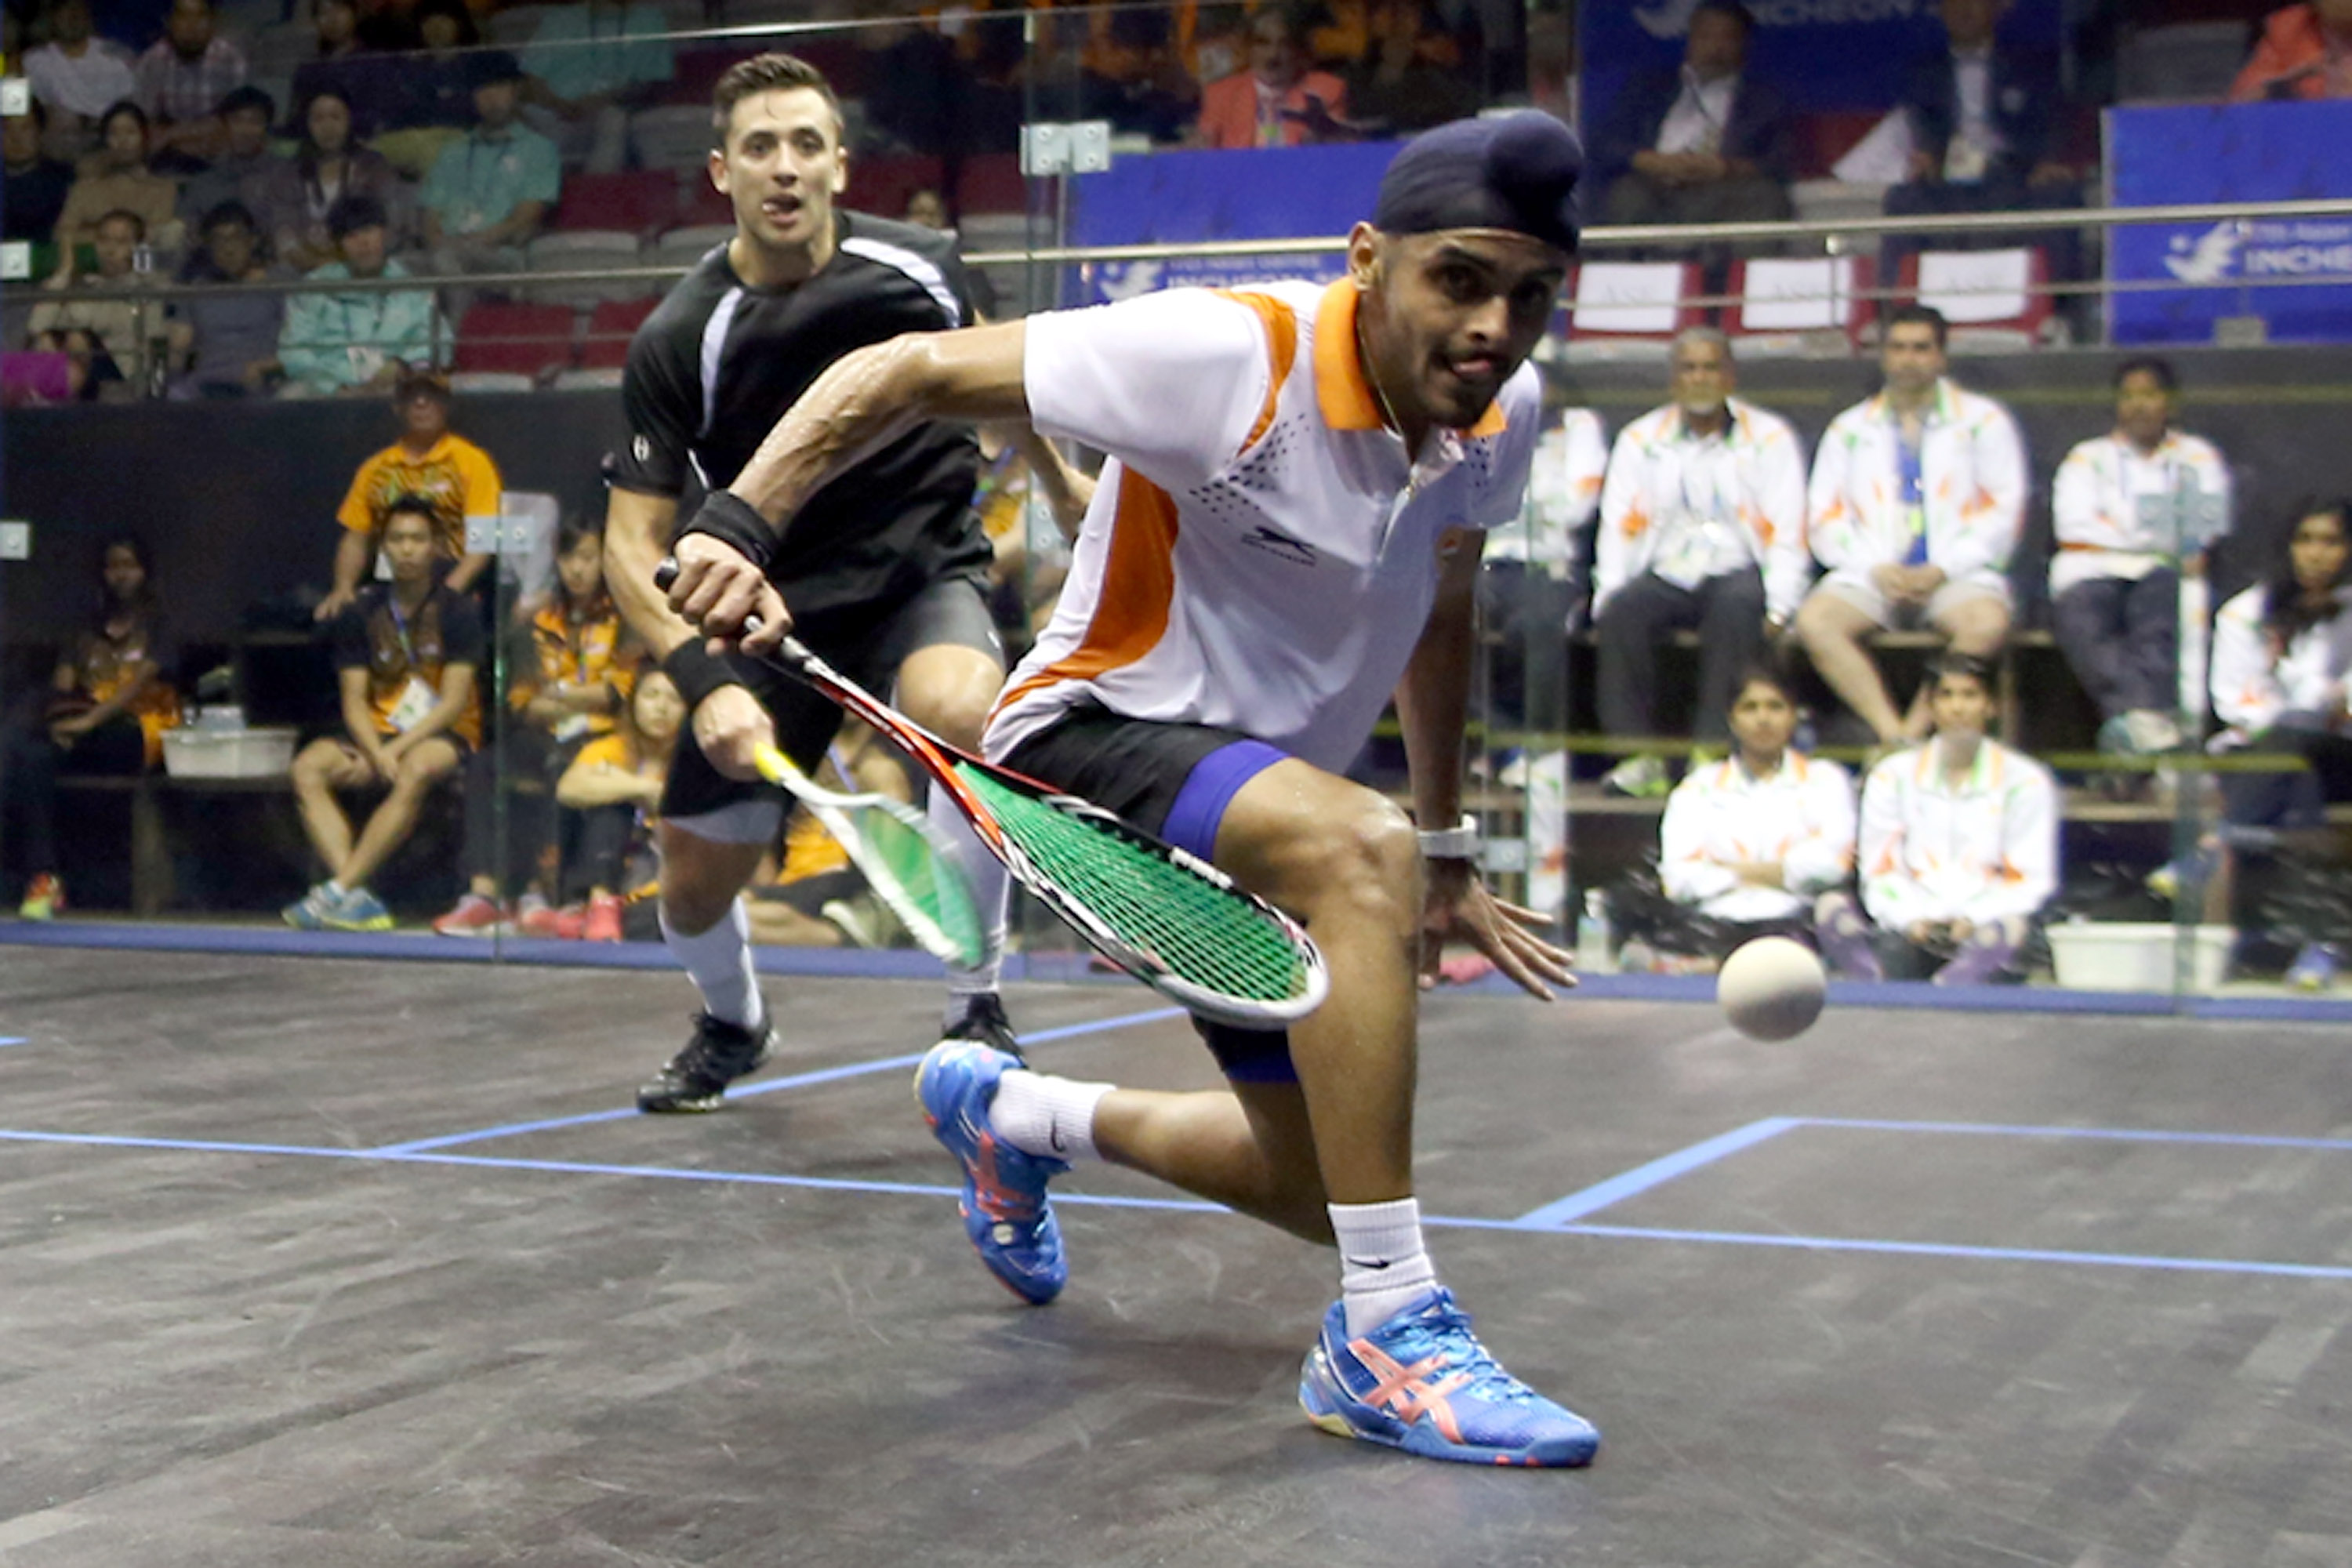 Harinder Pal Sandhu into the finals of the Victorian Open